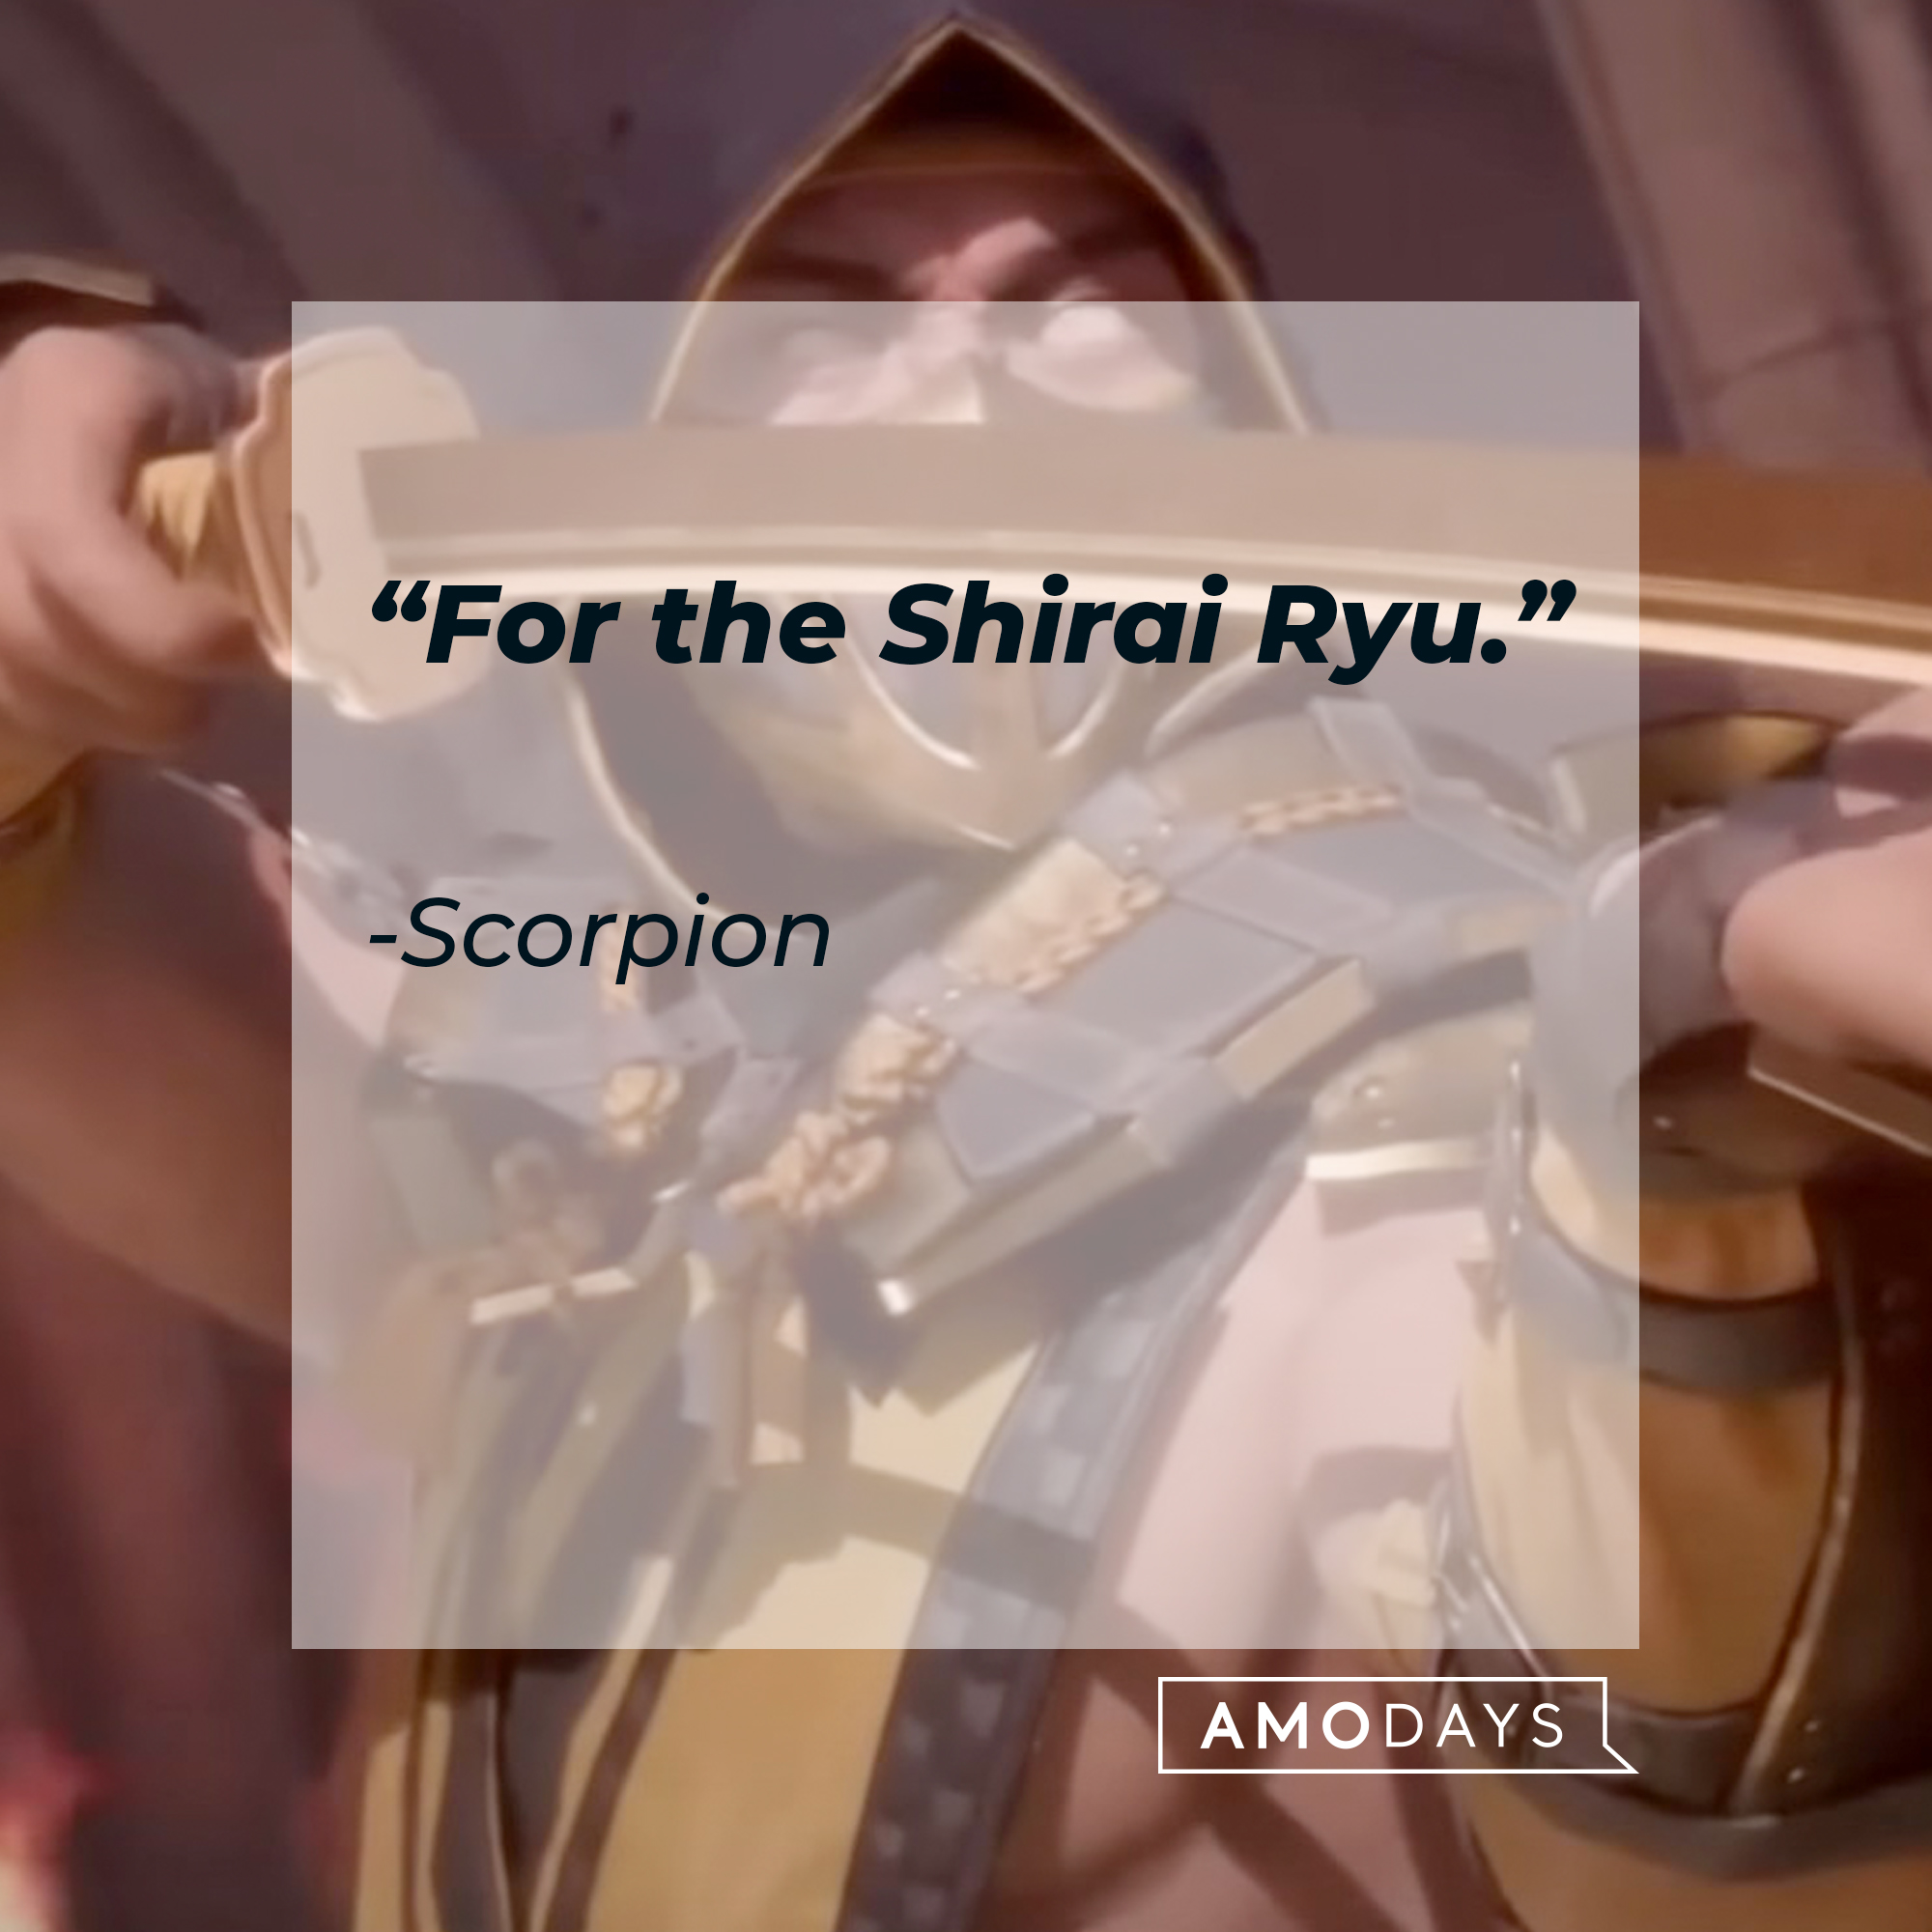 An image of Scorpion with his quote: “For the Shirai Ryu.” | Source: facebook.com/MortalKombatUK